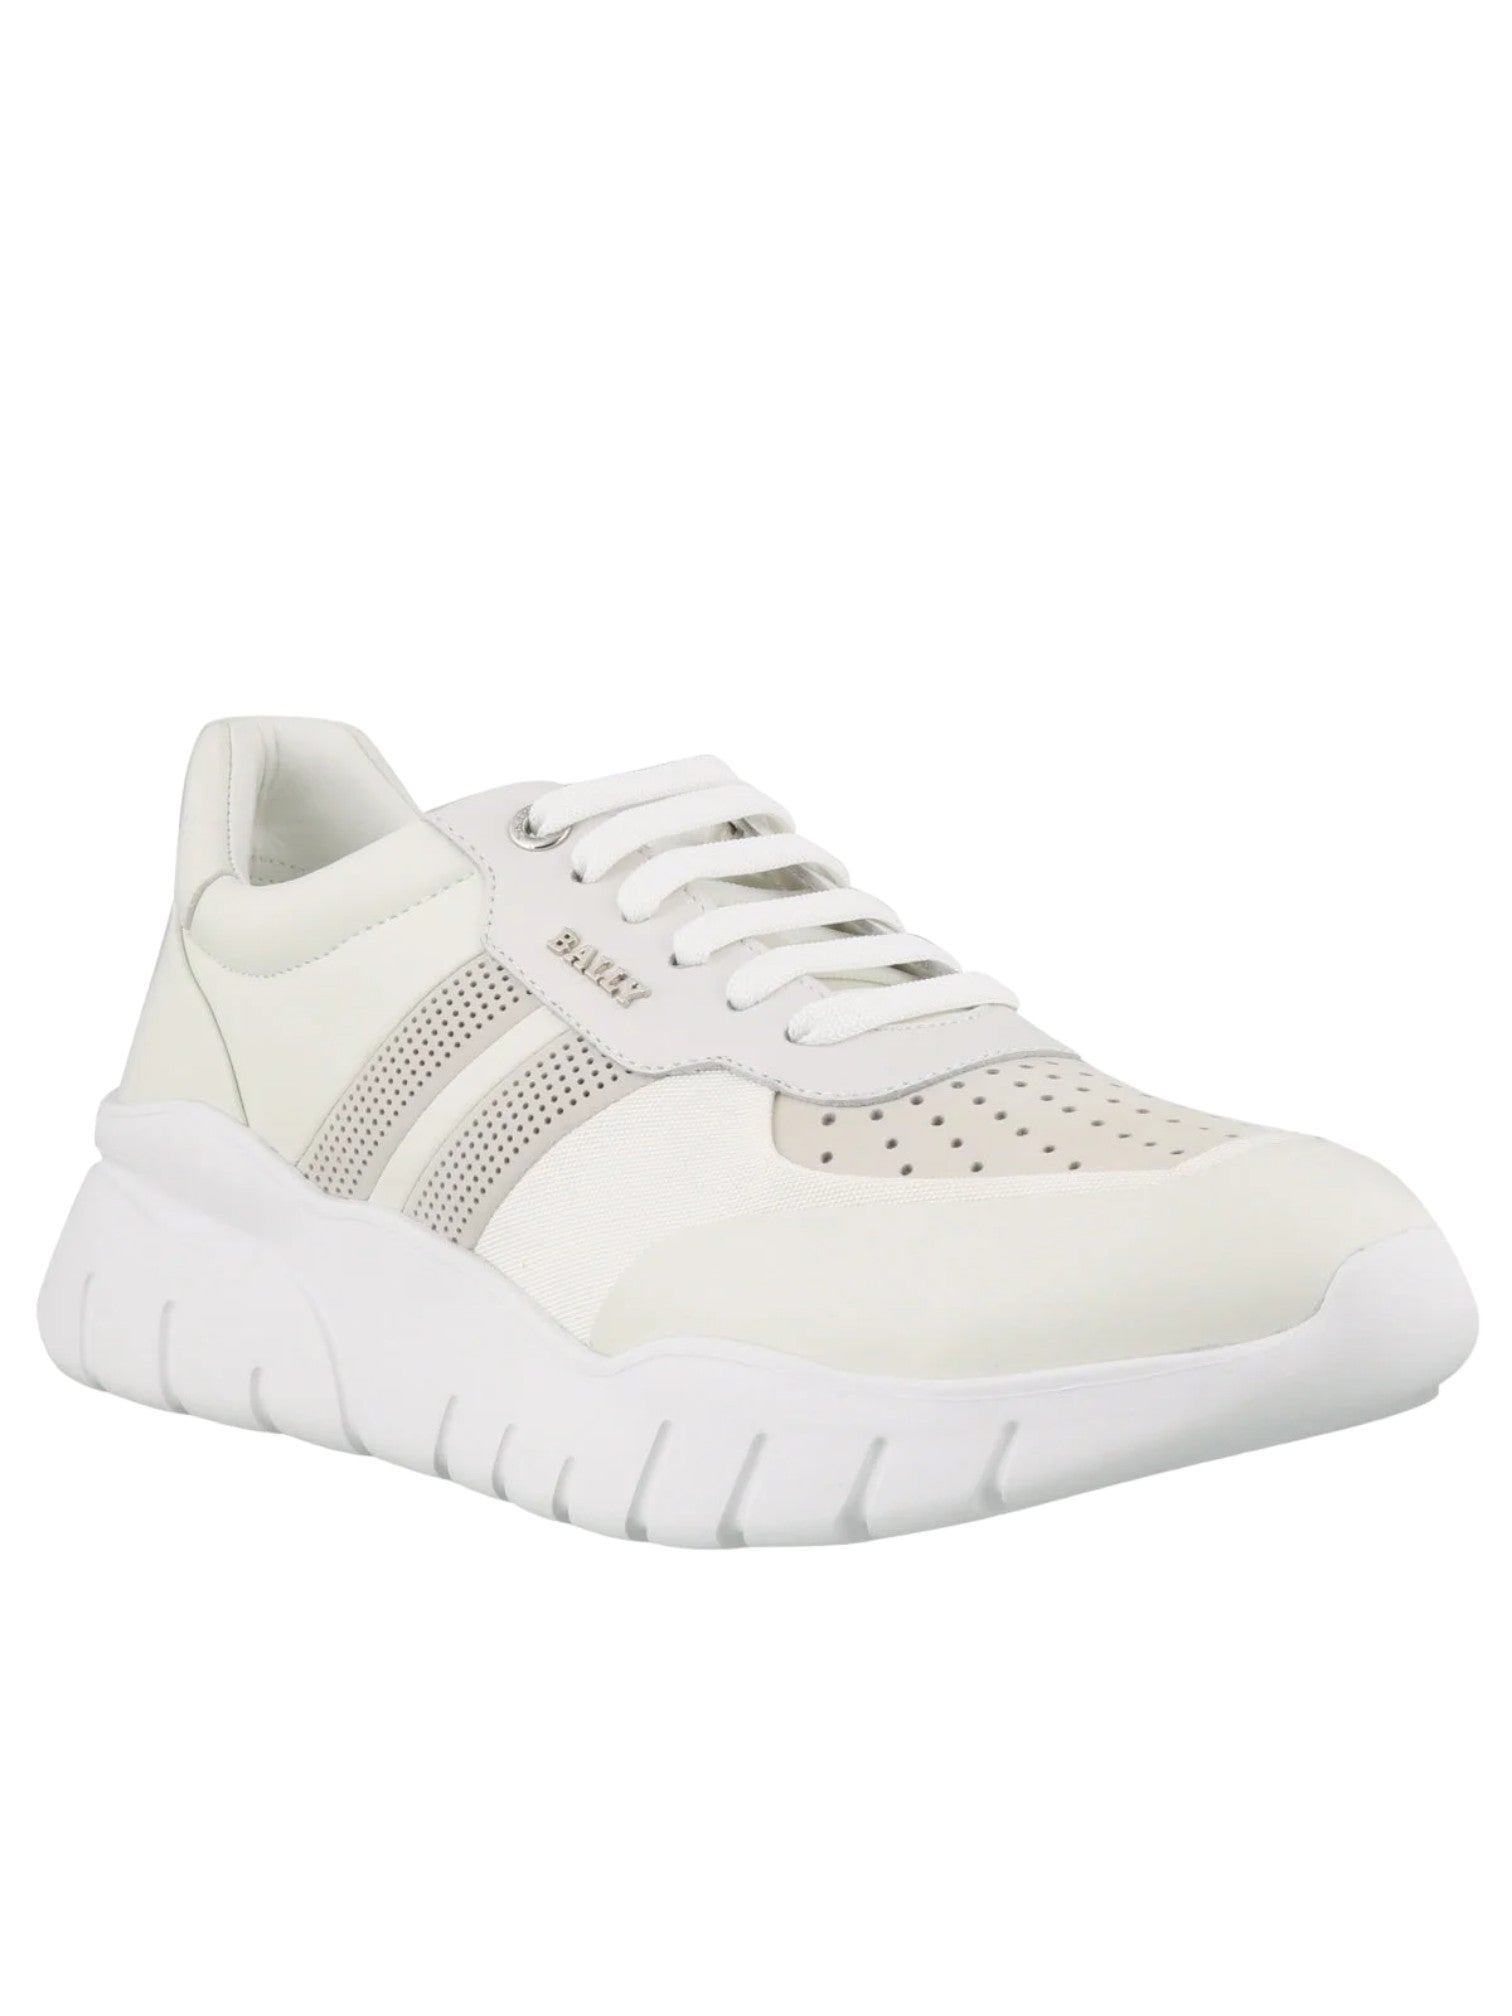 Shop Bally Bison 6230656 Men's White Lamb Leather Sneakers